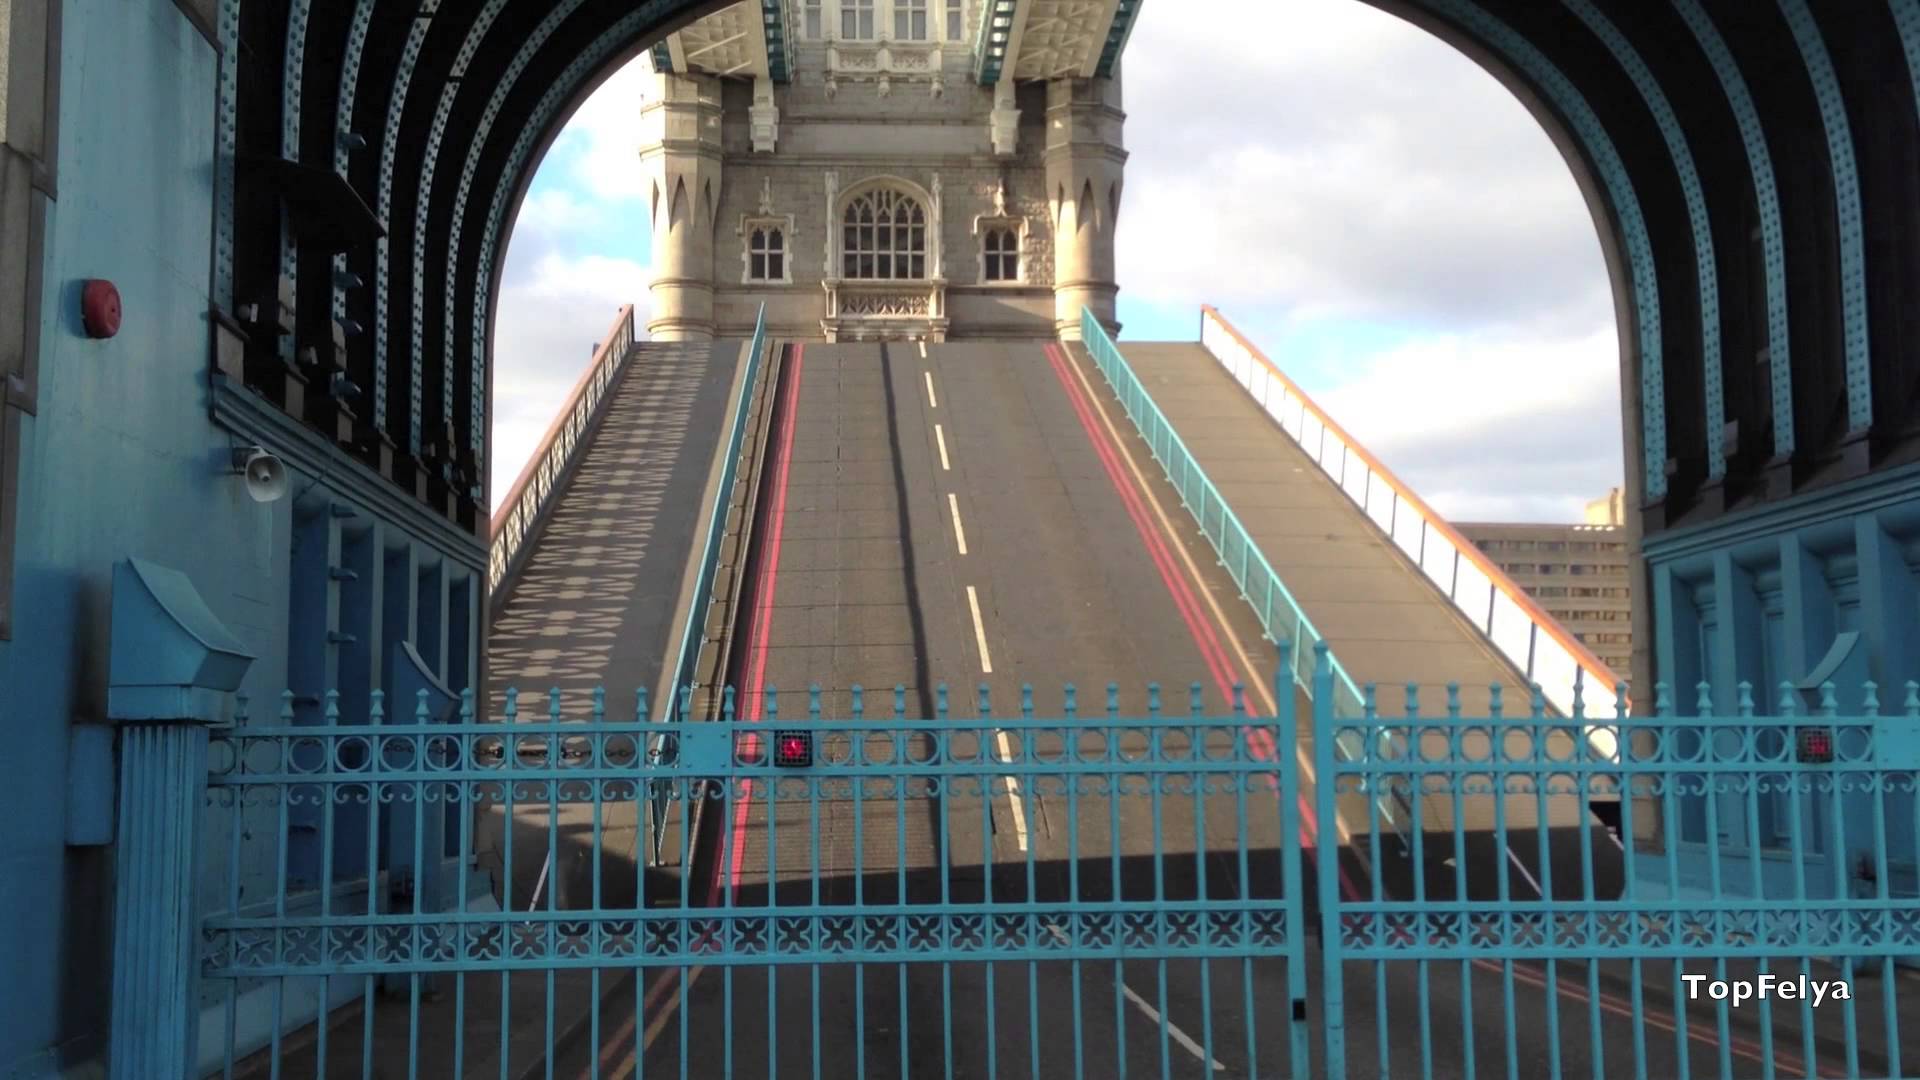 Tower Bridge opens up and stop my car - YouTube